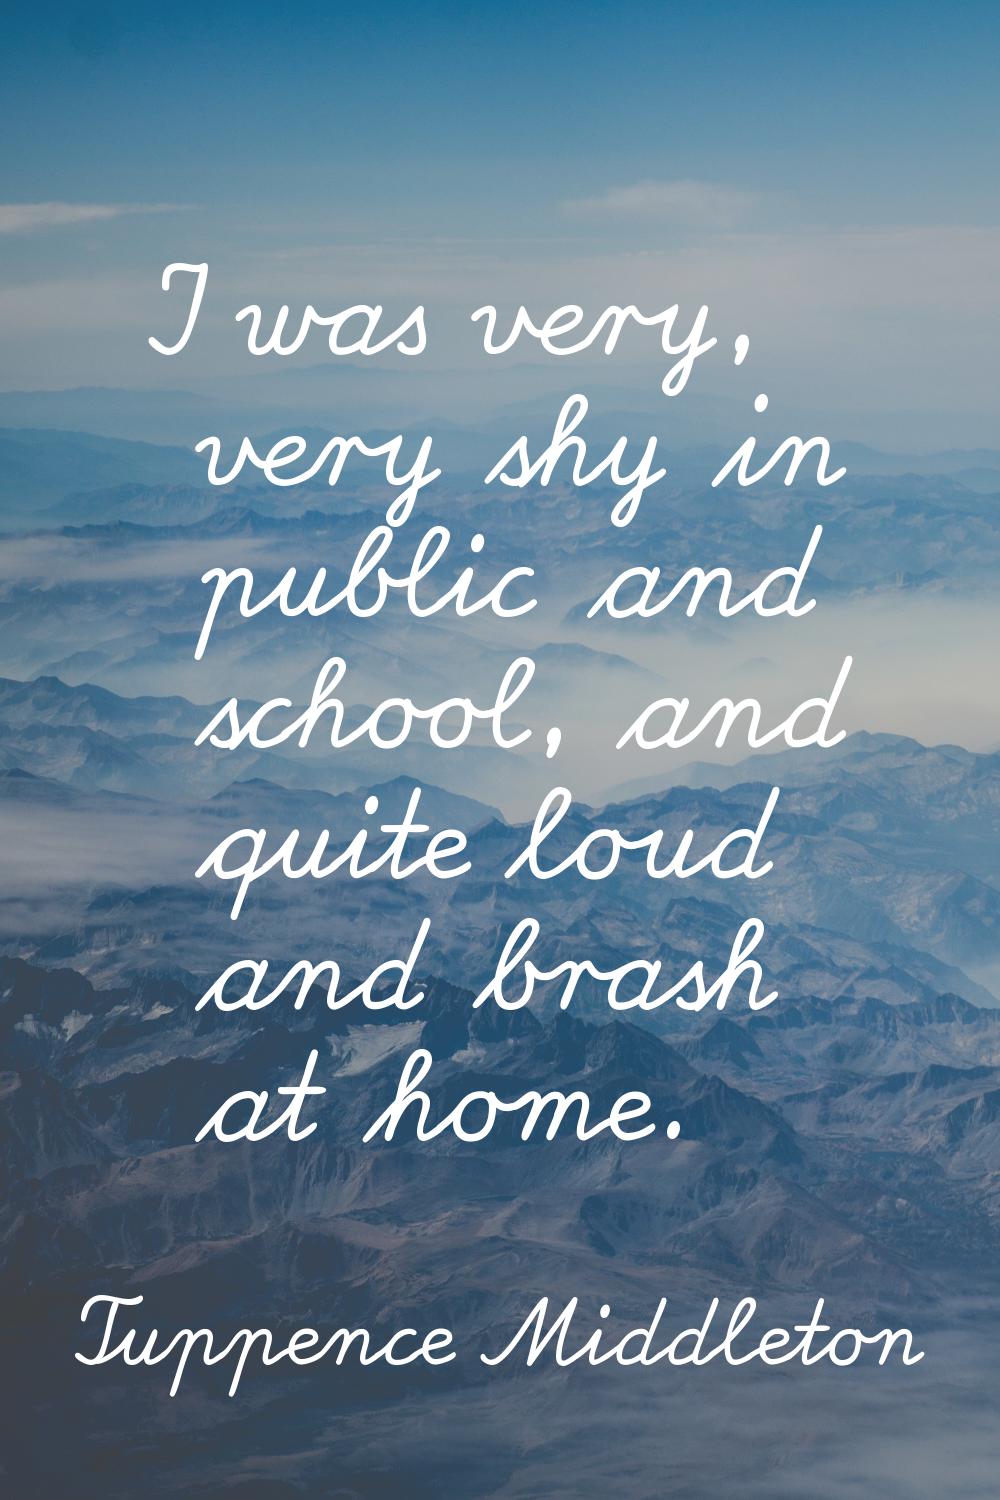 I was very, very shy in public and school, and quite loud and brash at home.